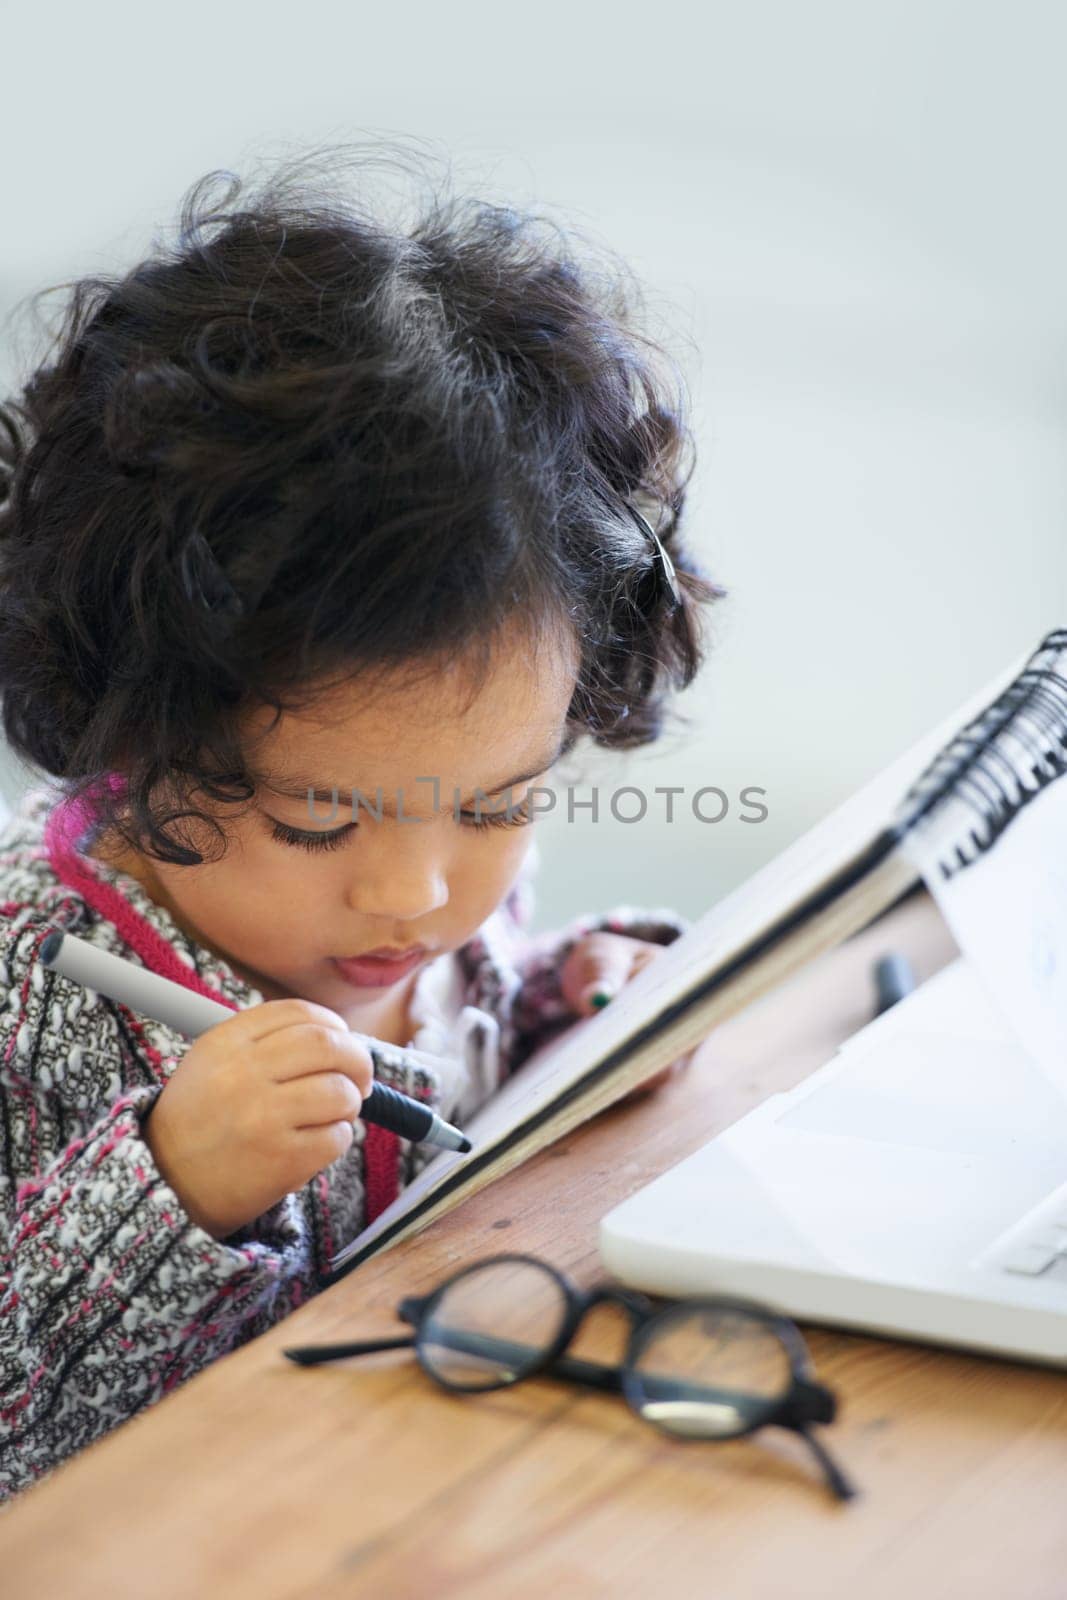 Writing book, learning and a child at a table for education, studying or drawing in a house. Relax, hobby and a girl, kid or baby with a notebook for art, picture or creativity at a home desk.